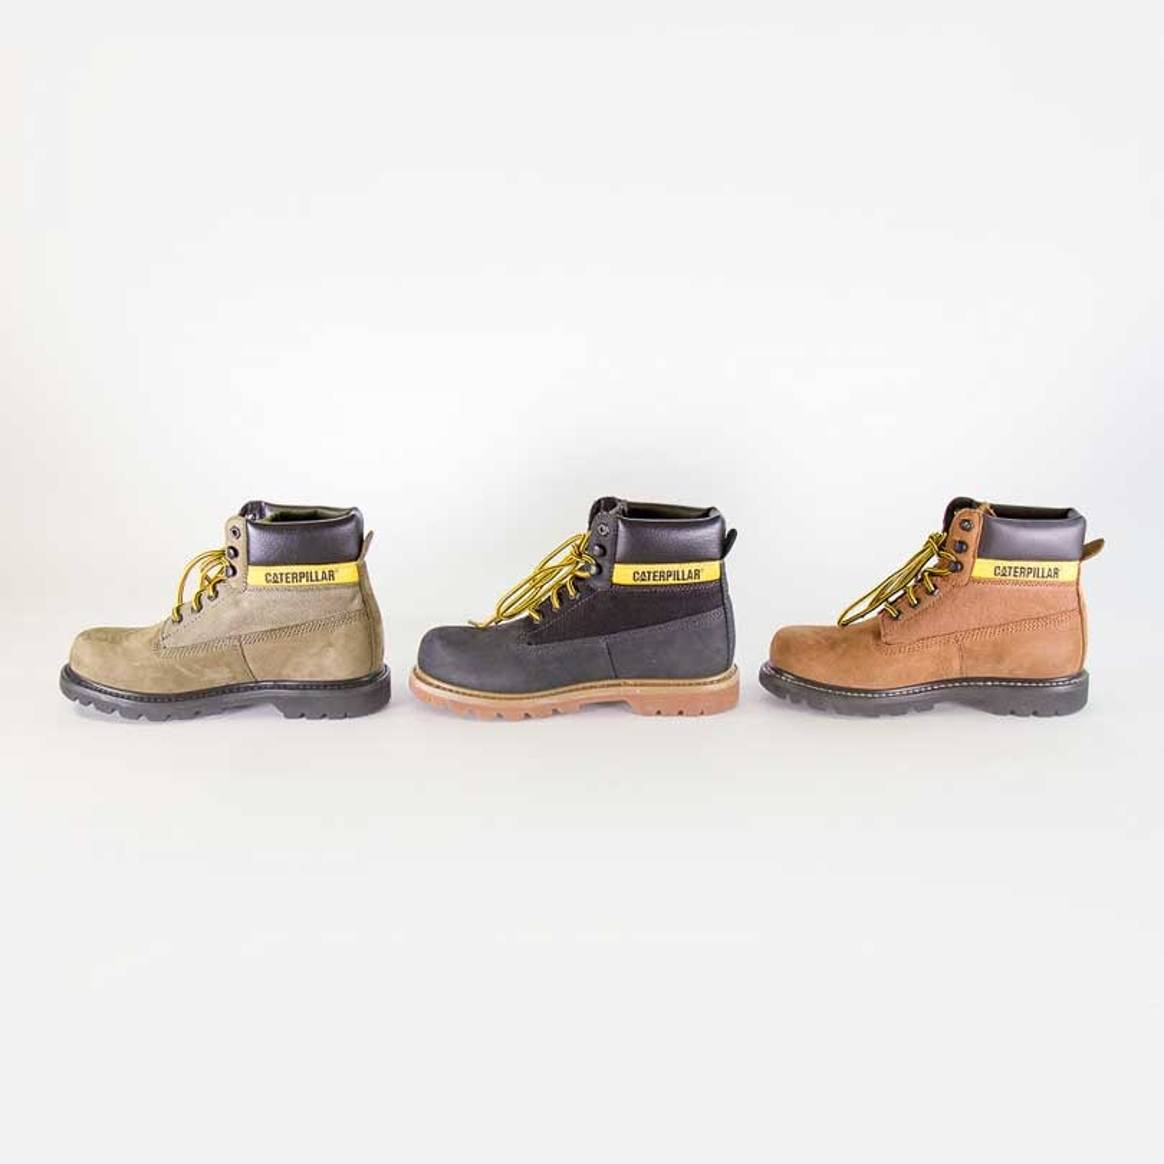 Cat Footwear x Schuh launch exclusive capsule collection